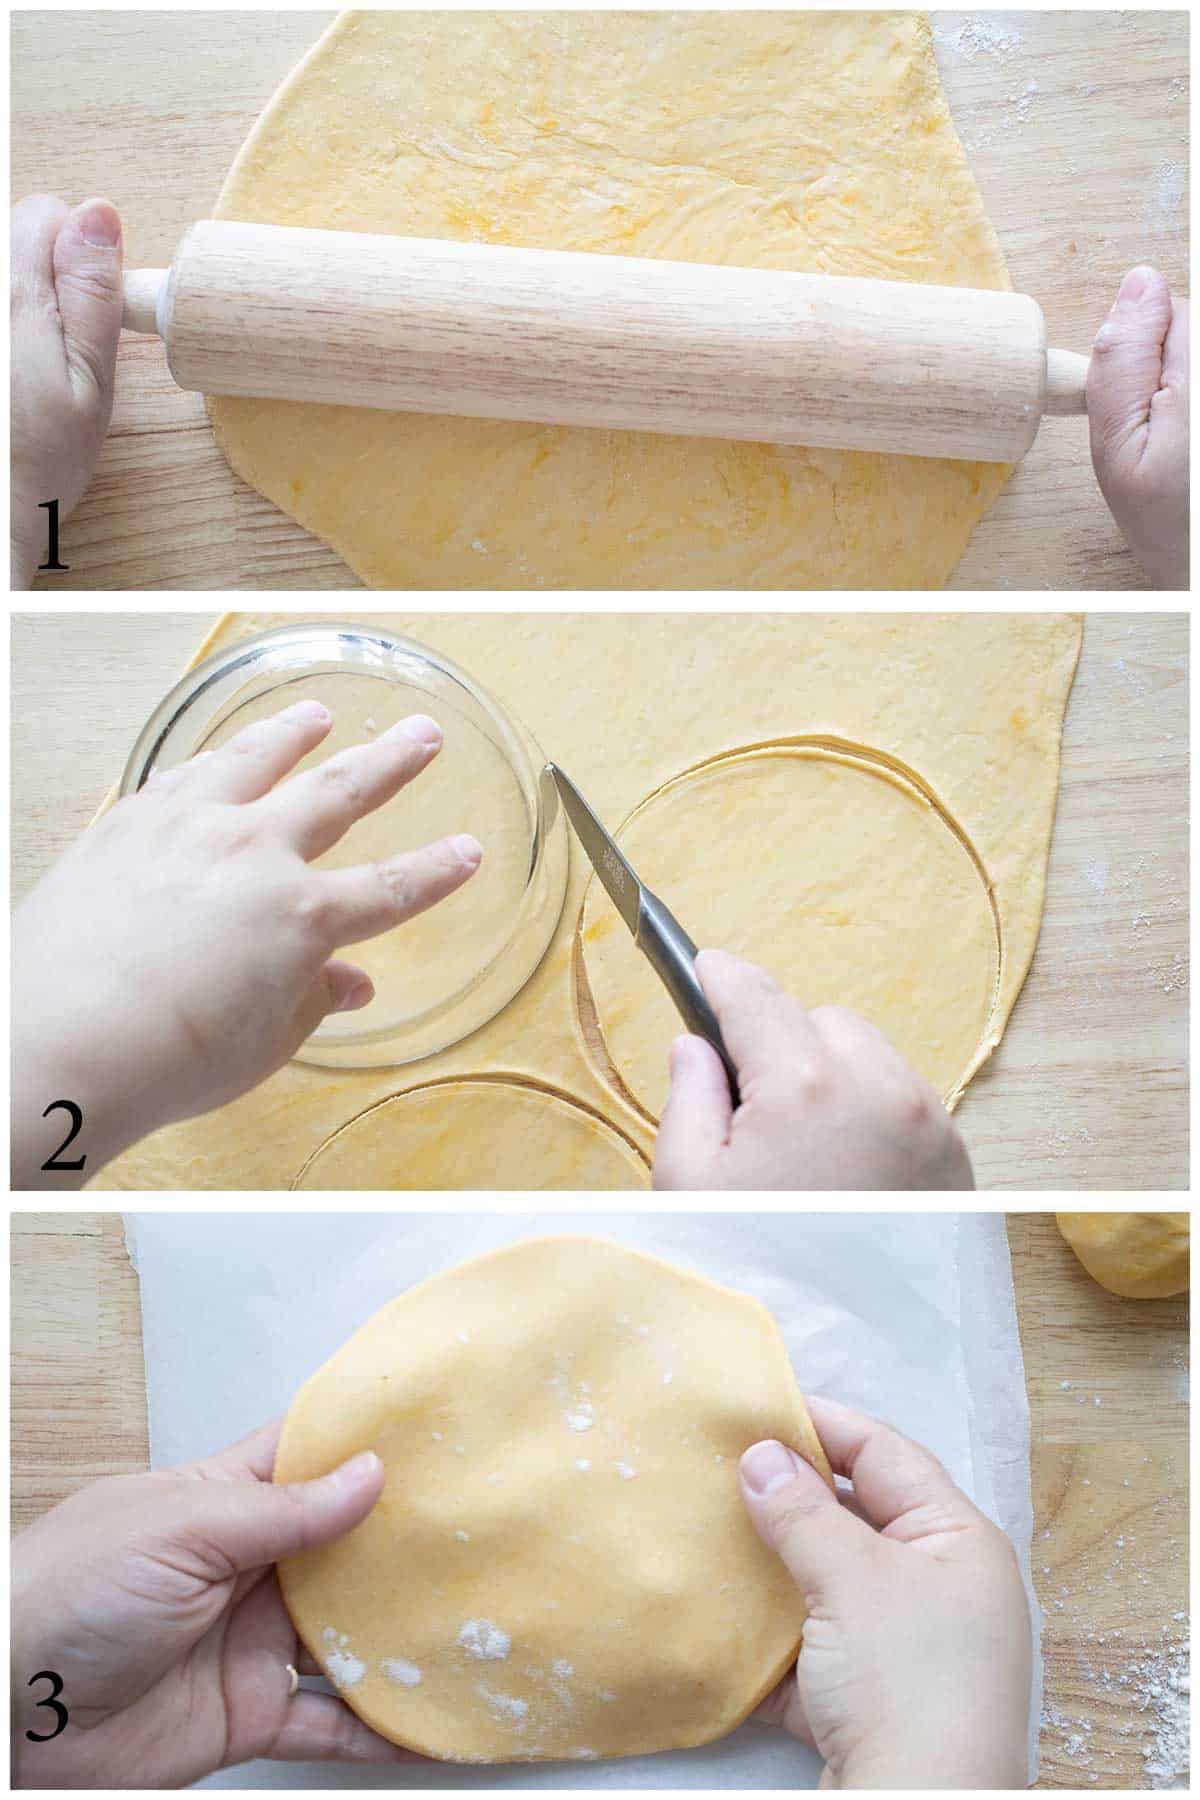 steps 1-3 on how to make empanadilla disk byt rolling out all the dough and then cutting out round disks.